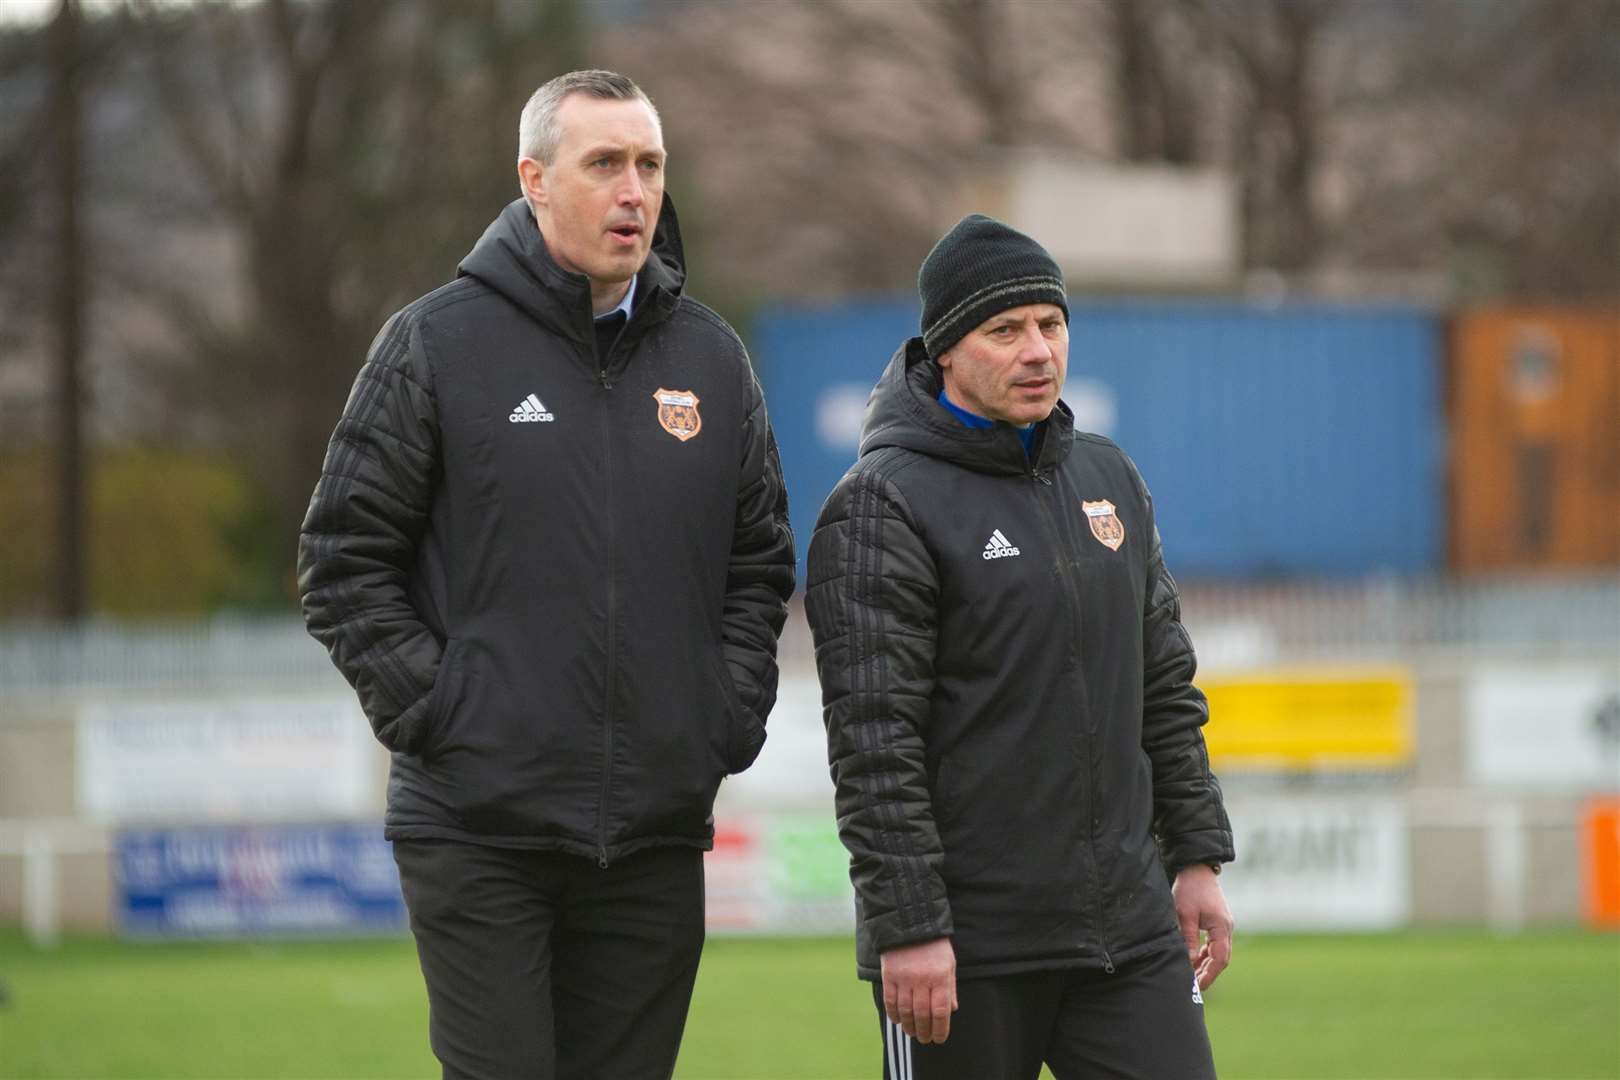 Gordon Connelly (right) and Steven MacDonald (left) during their spell with Rothes. Picture: Daniel Forsyth